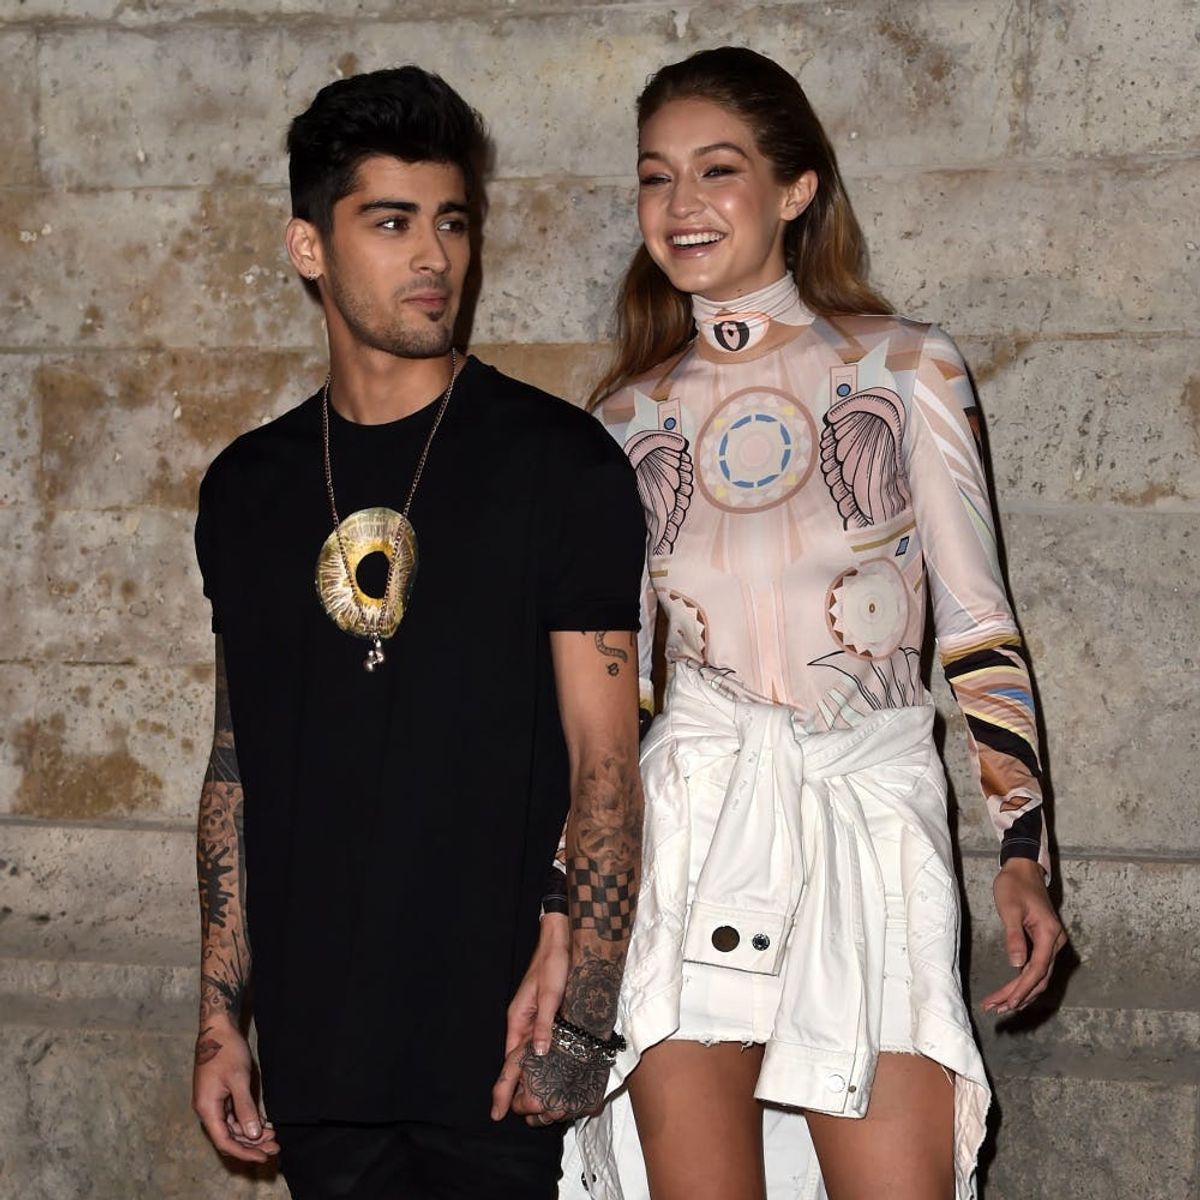 Gigi Hadid and Zayn Malik’s Vogue Cover Sparked a Conversation About Gender Fluidity